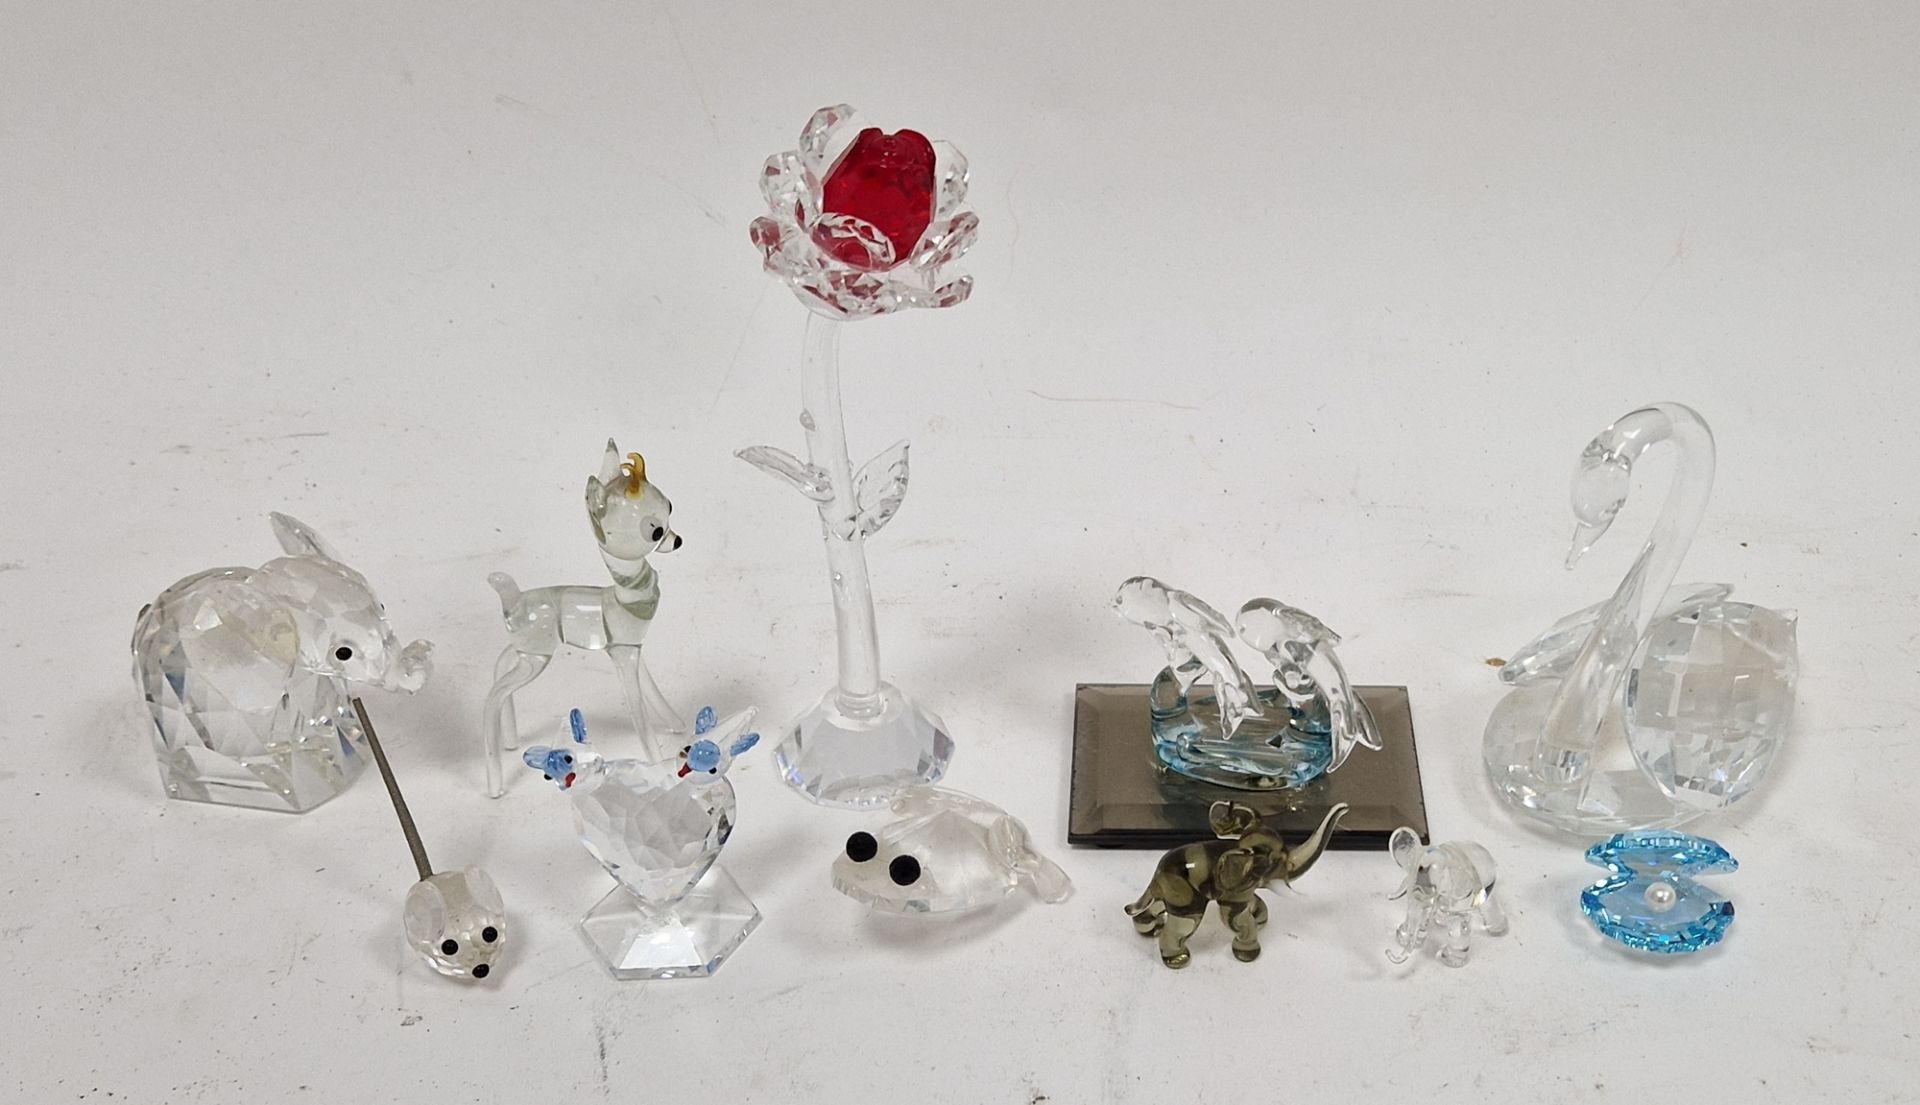 Group of Swarovski crystal animals and other items similar, including: a swan, an elephant, a